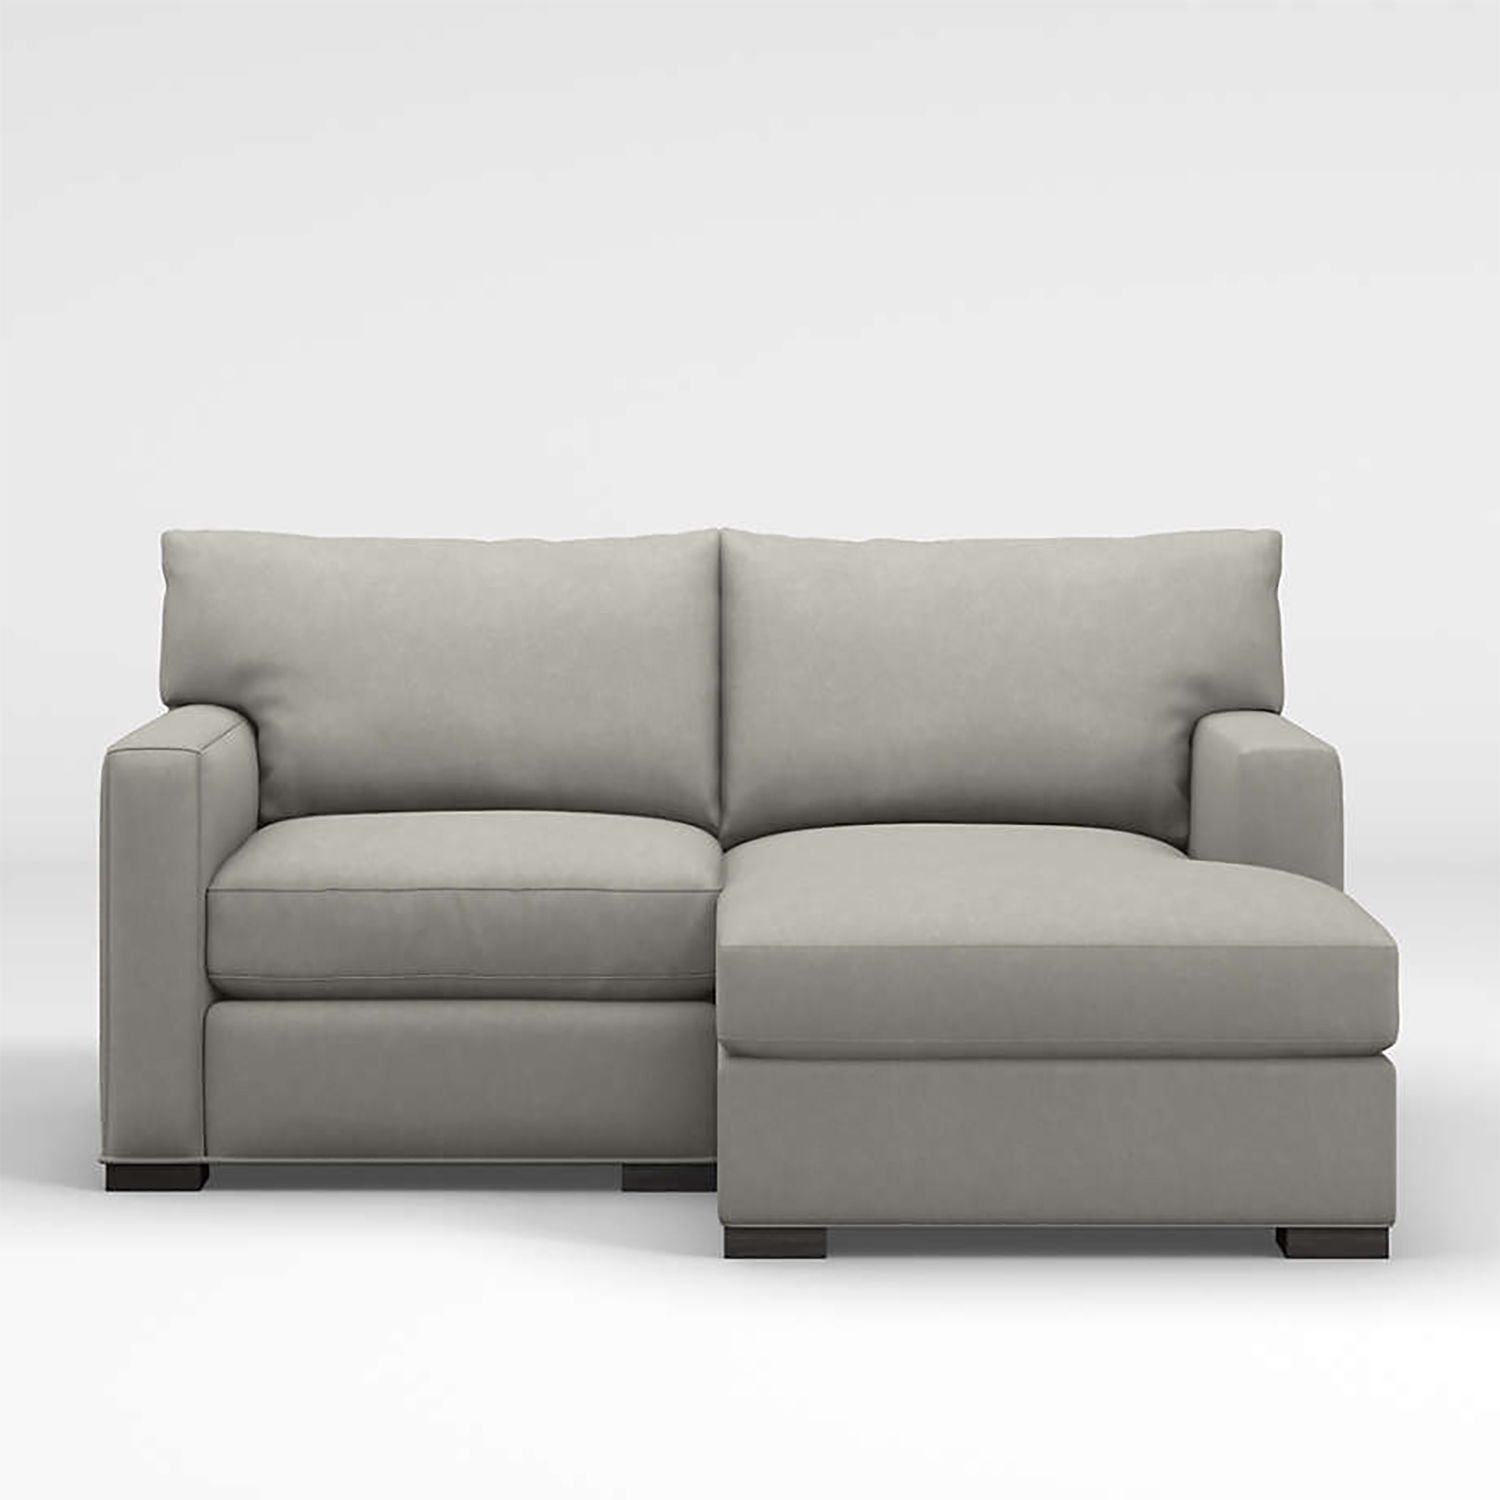 CRATE AND BARREL AXIS TWO PIECE SECTIONAL